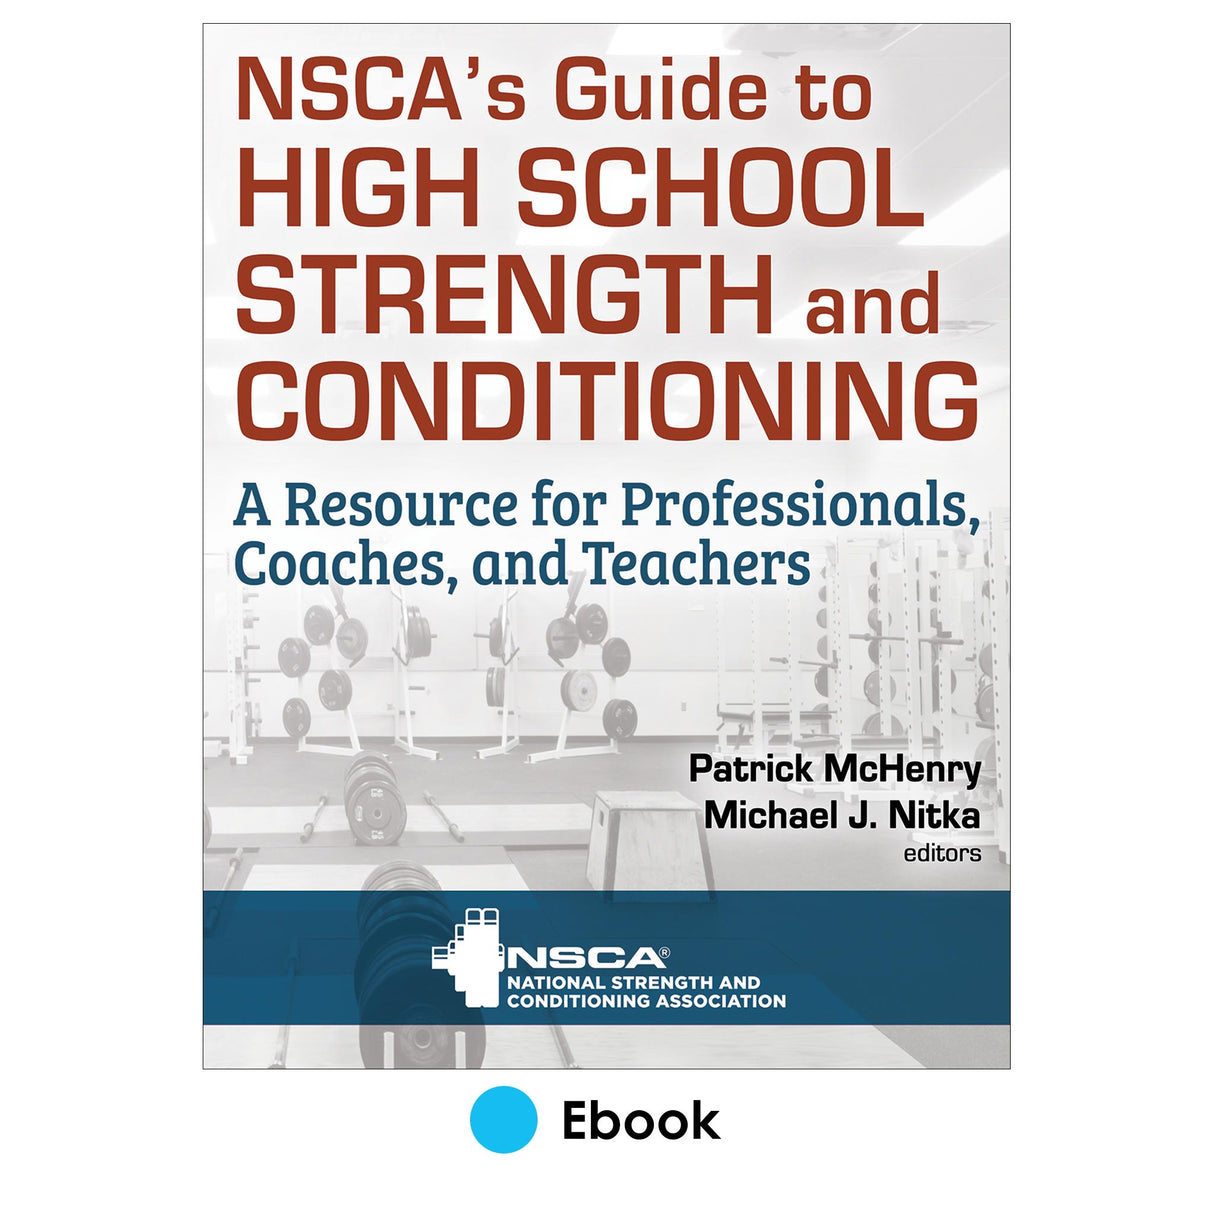 NSCA’s Guide to High School Strength and Conditioning epub